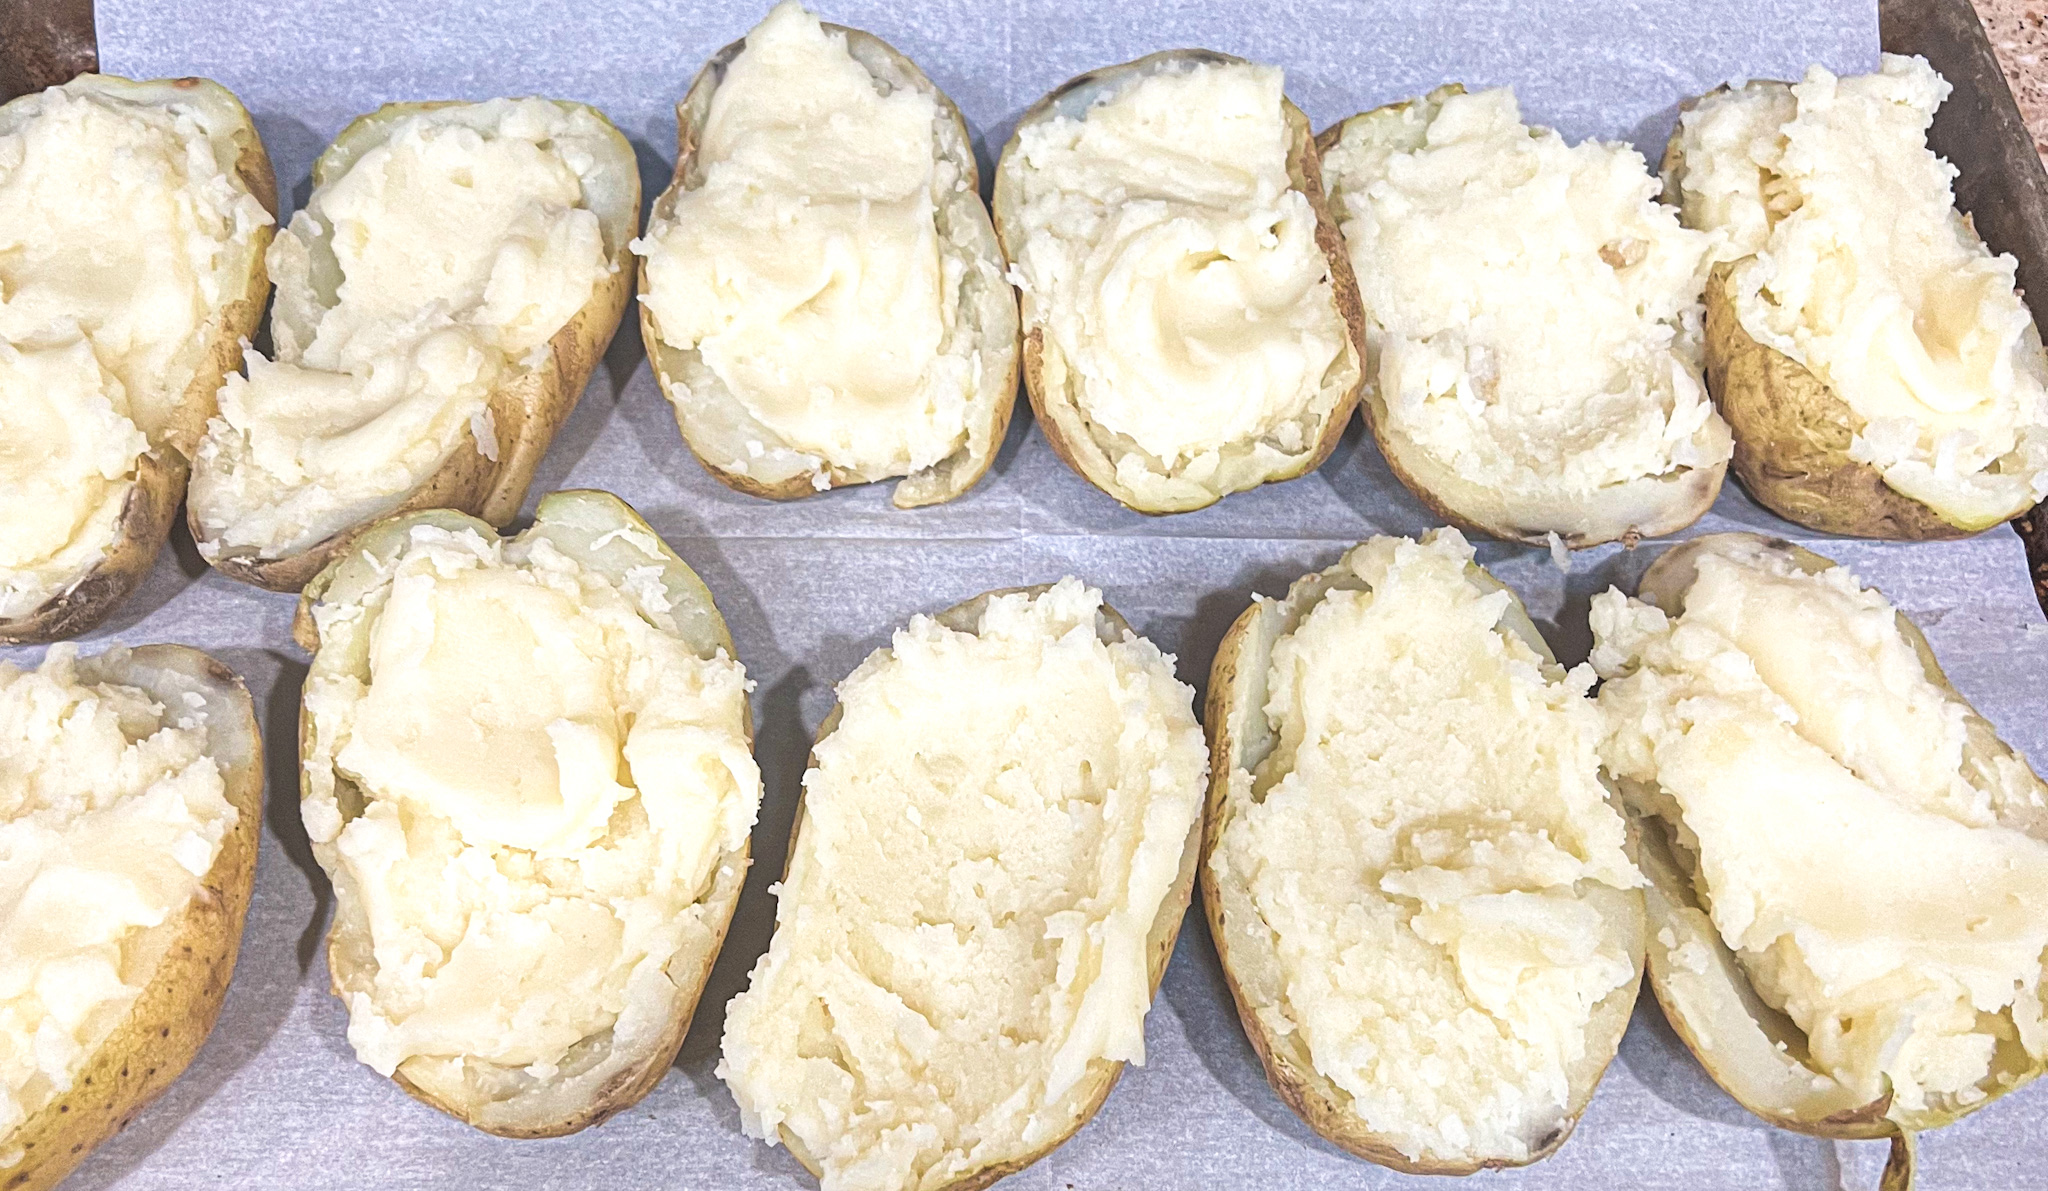 a picture of twice baked potatoes with the insides scooped out and mashed potatoes being placed inside to fill. 